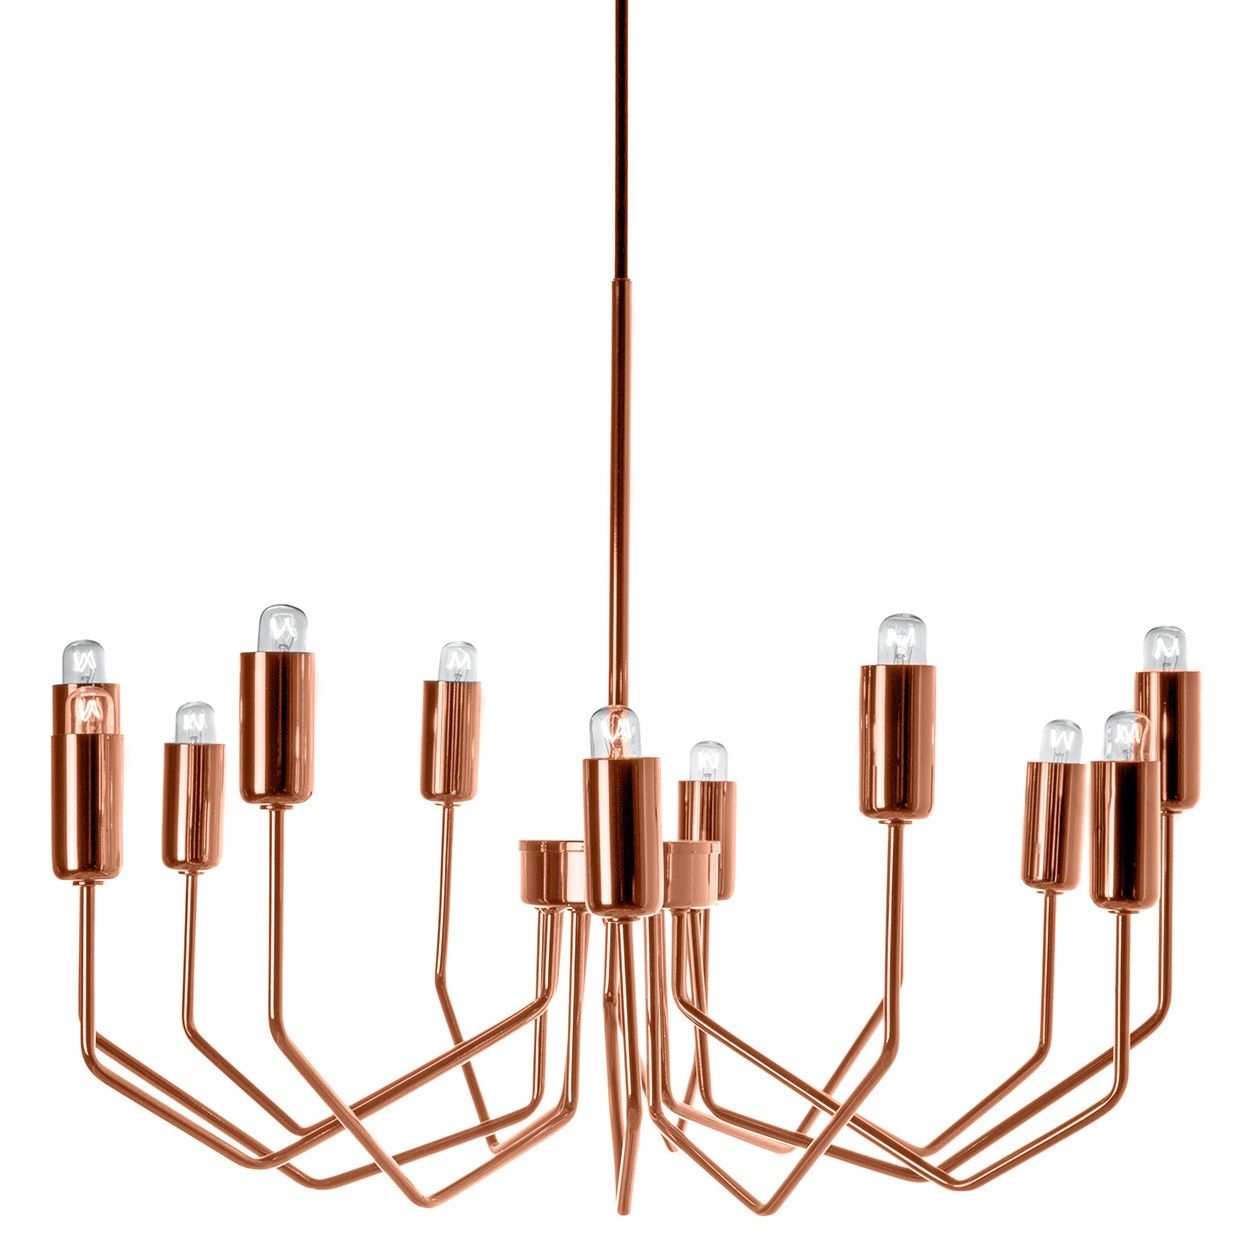 Olbia Copper Chandelier More Chandeliers Ideas With Copper Chandelier (View 5 of 12)